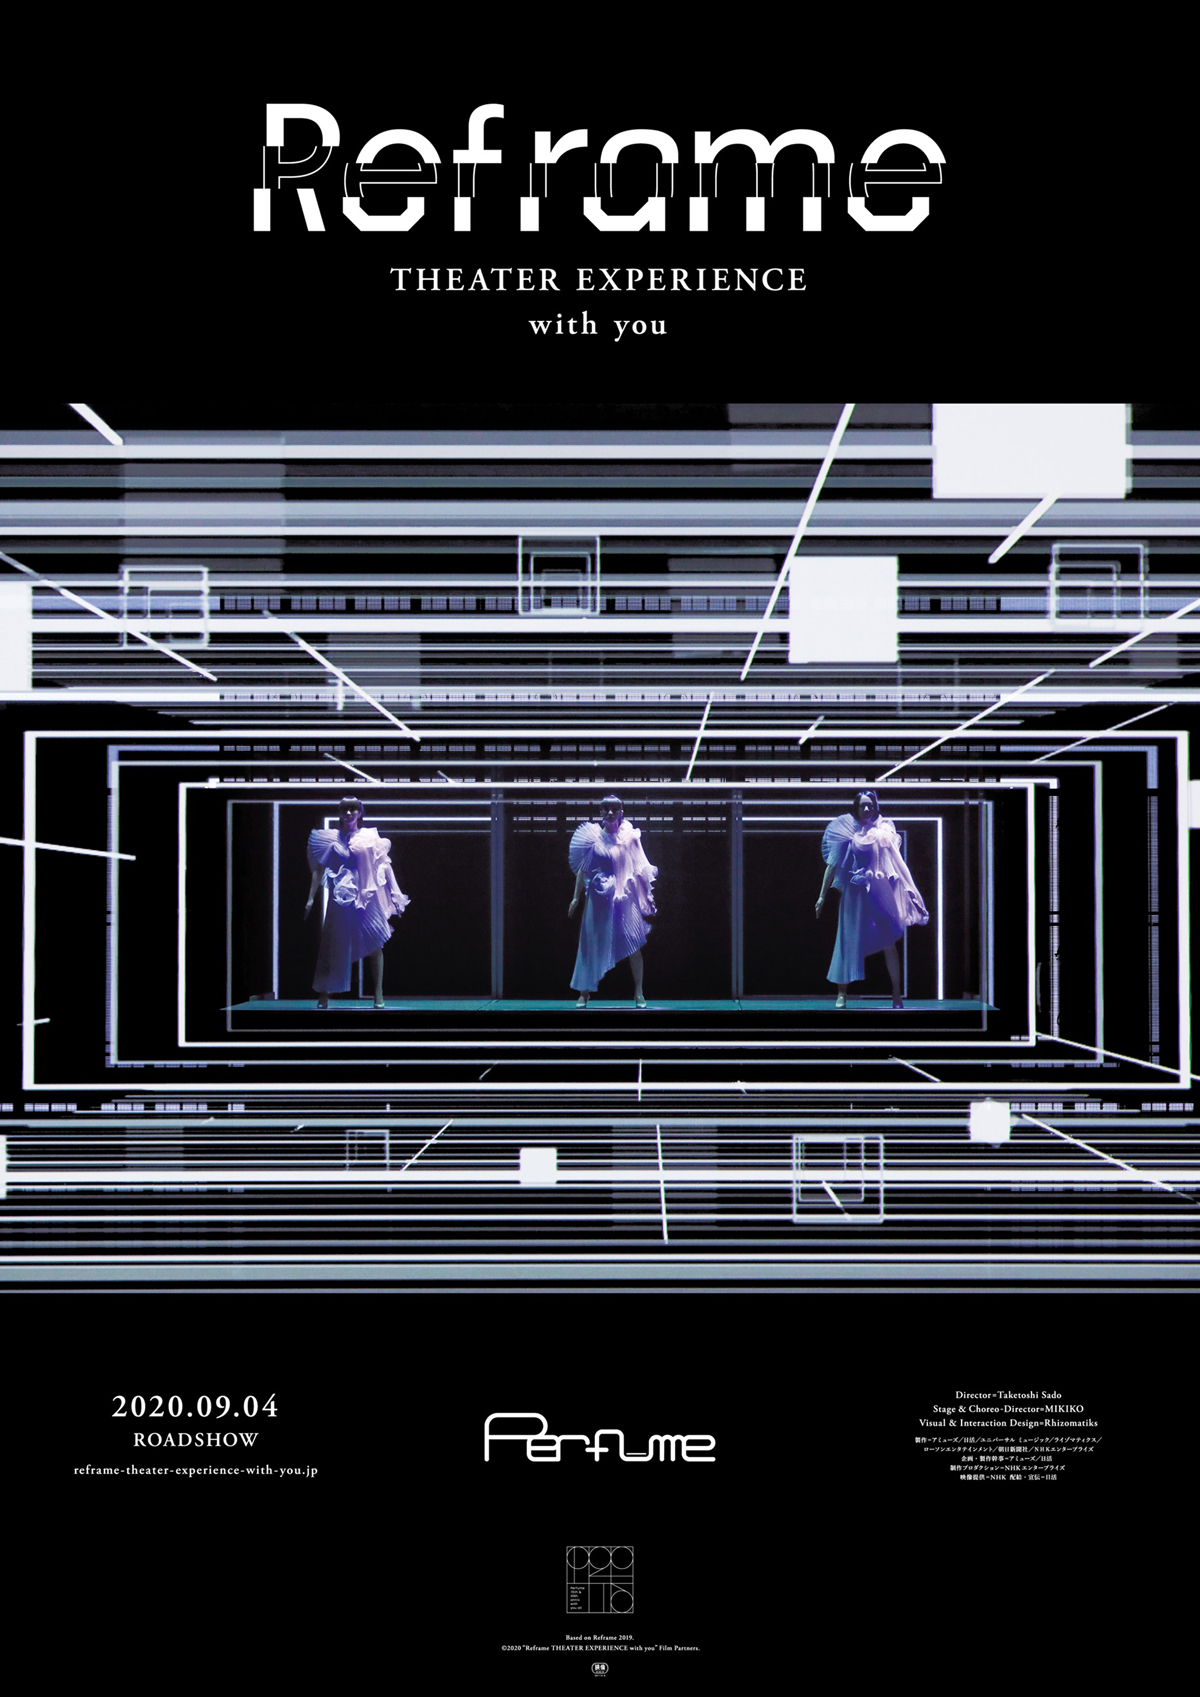 Reframe THEATER EXPERIENCE with youの画像